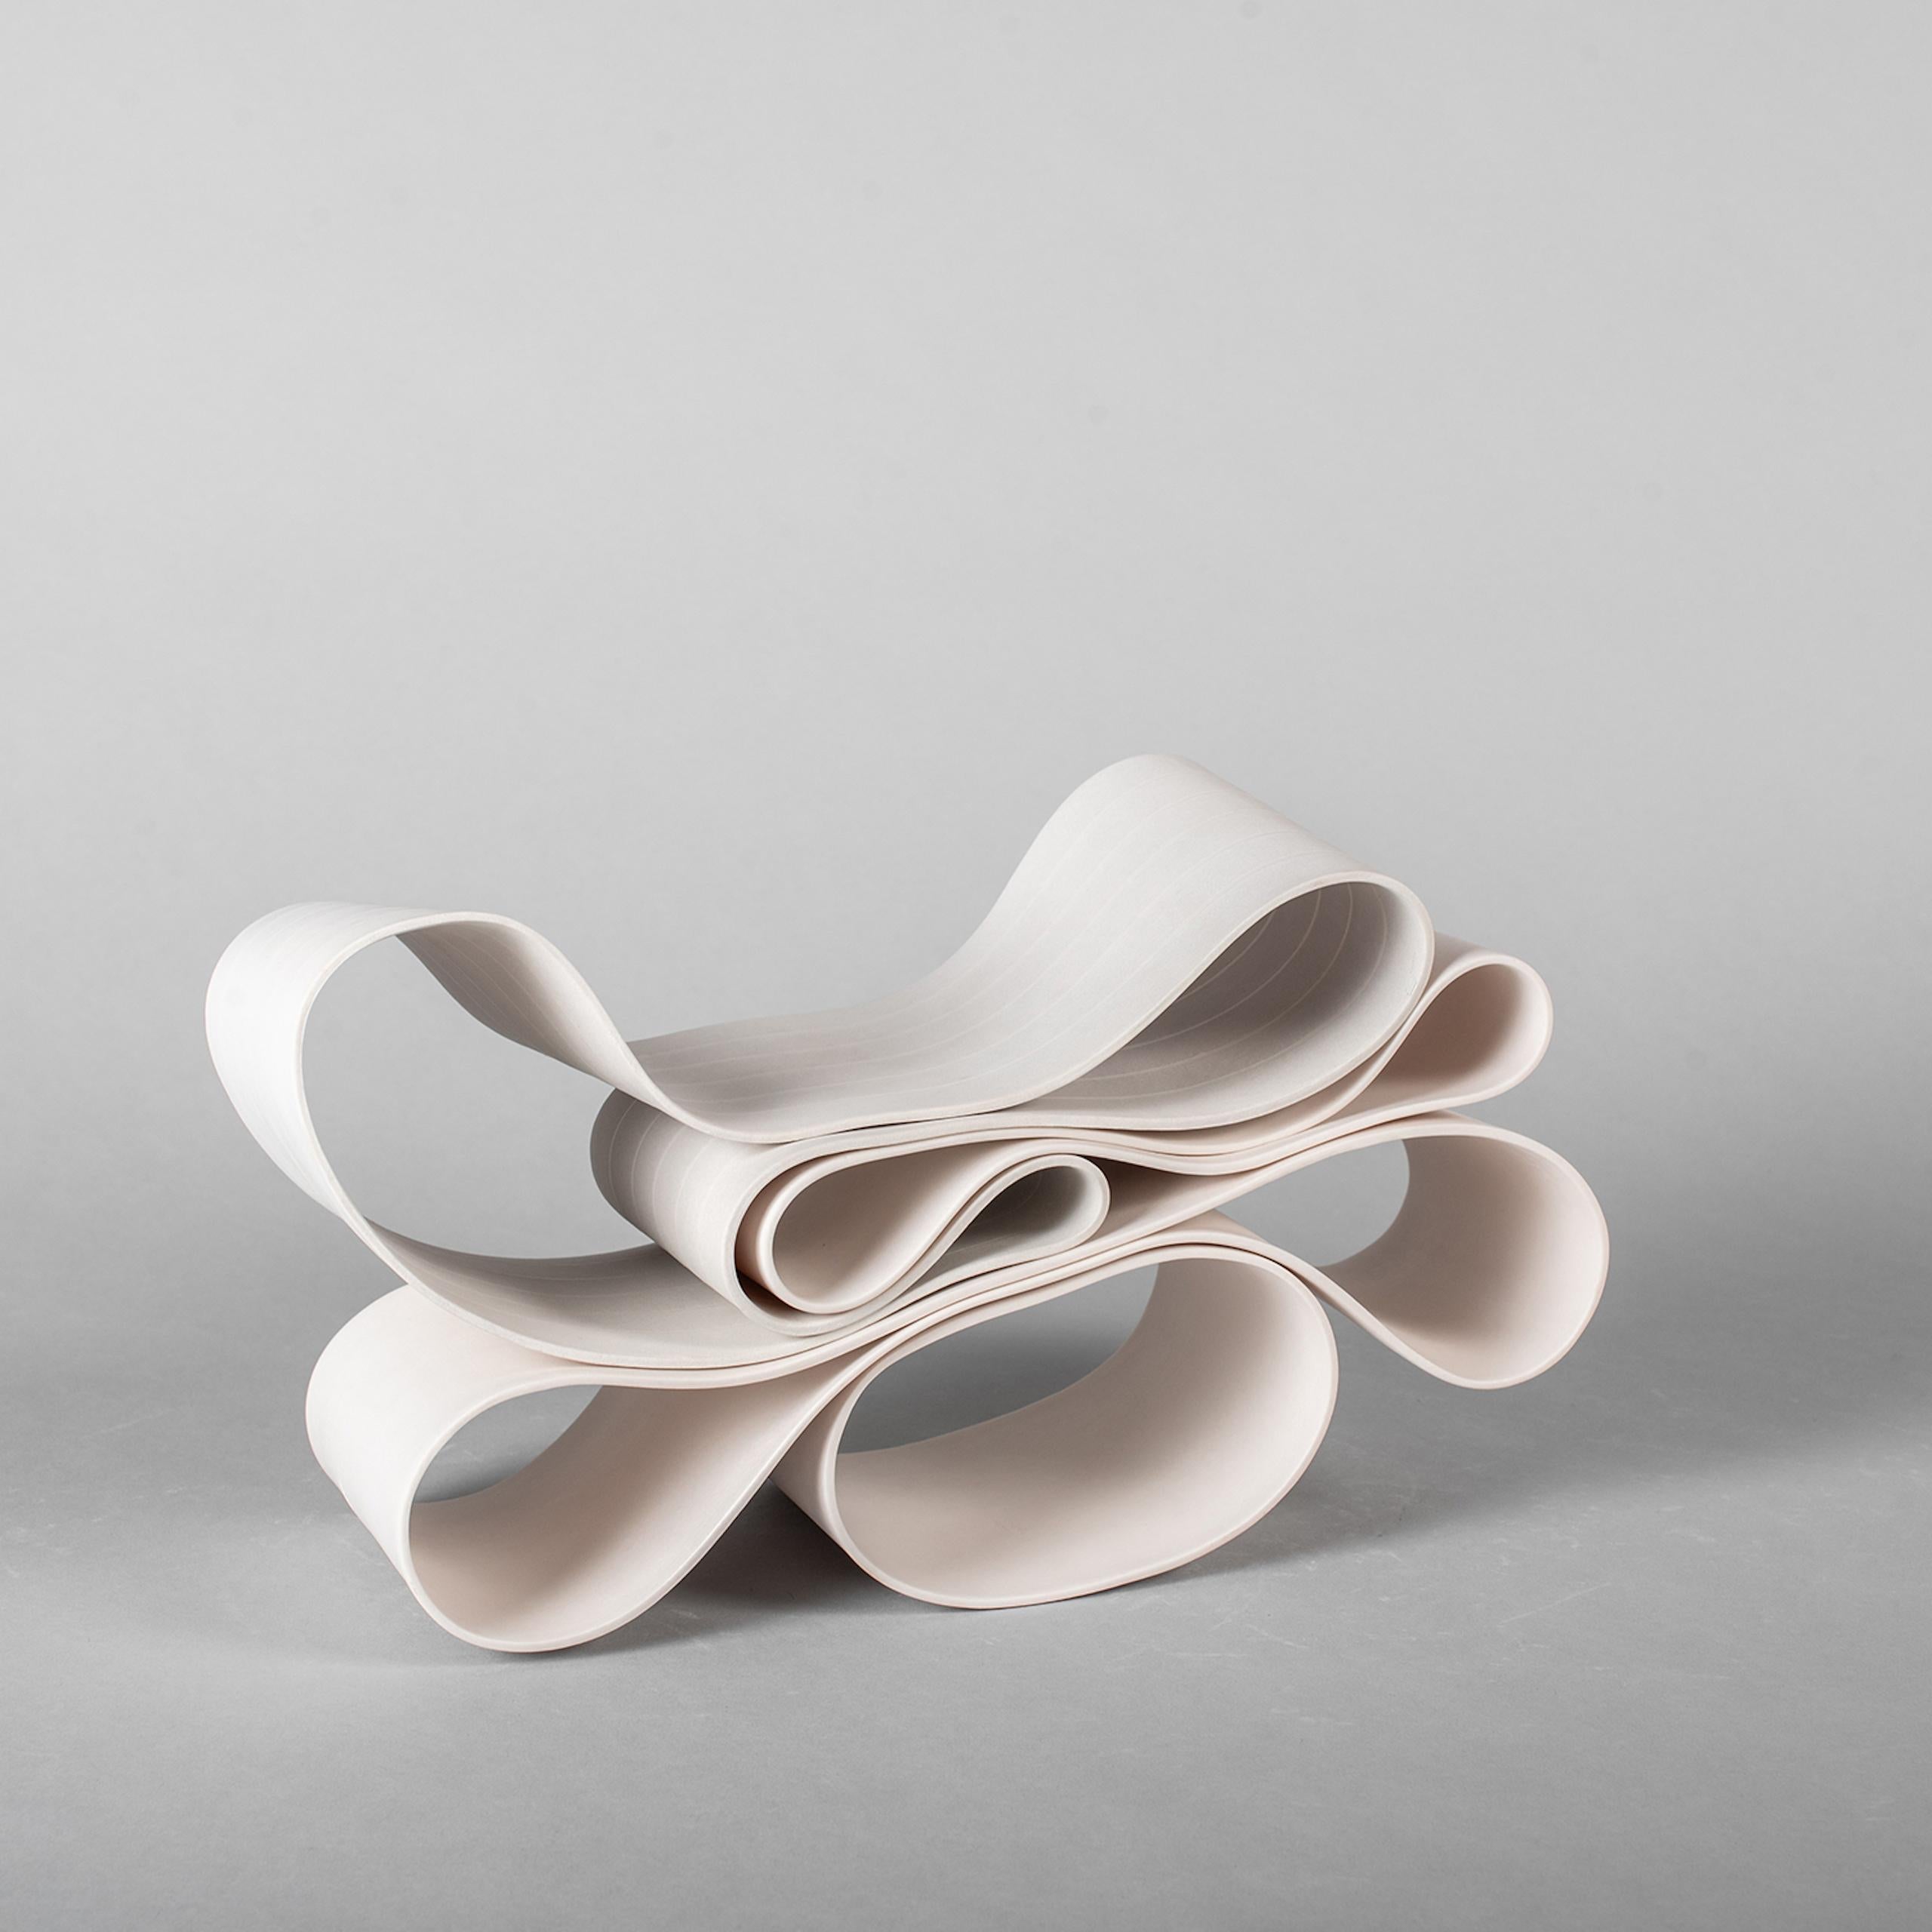 Folding in Motion 10 by Simcha Even-Chen - Porcelain sculpture, white, line For Sale 1